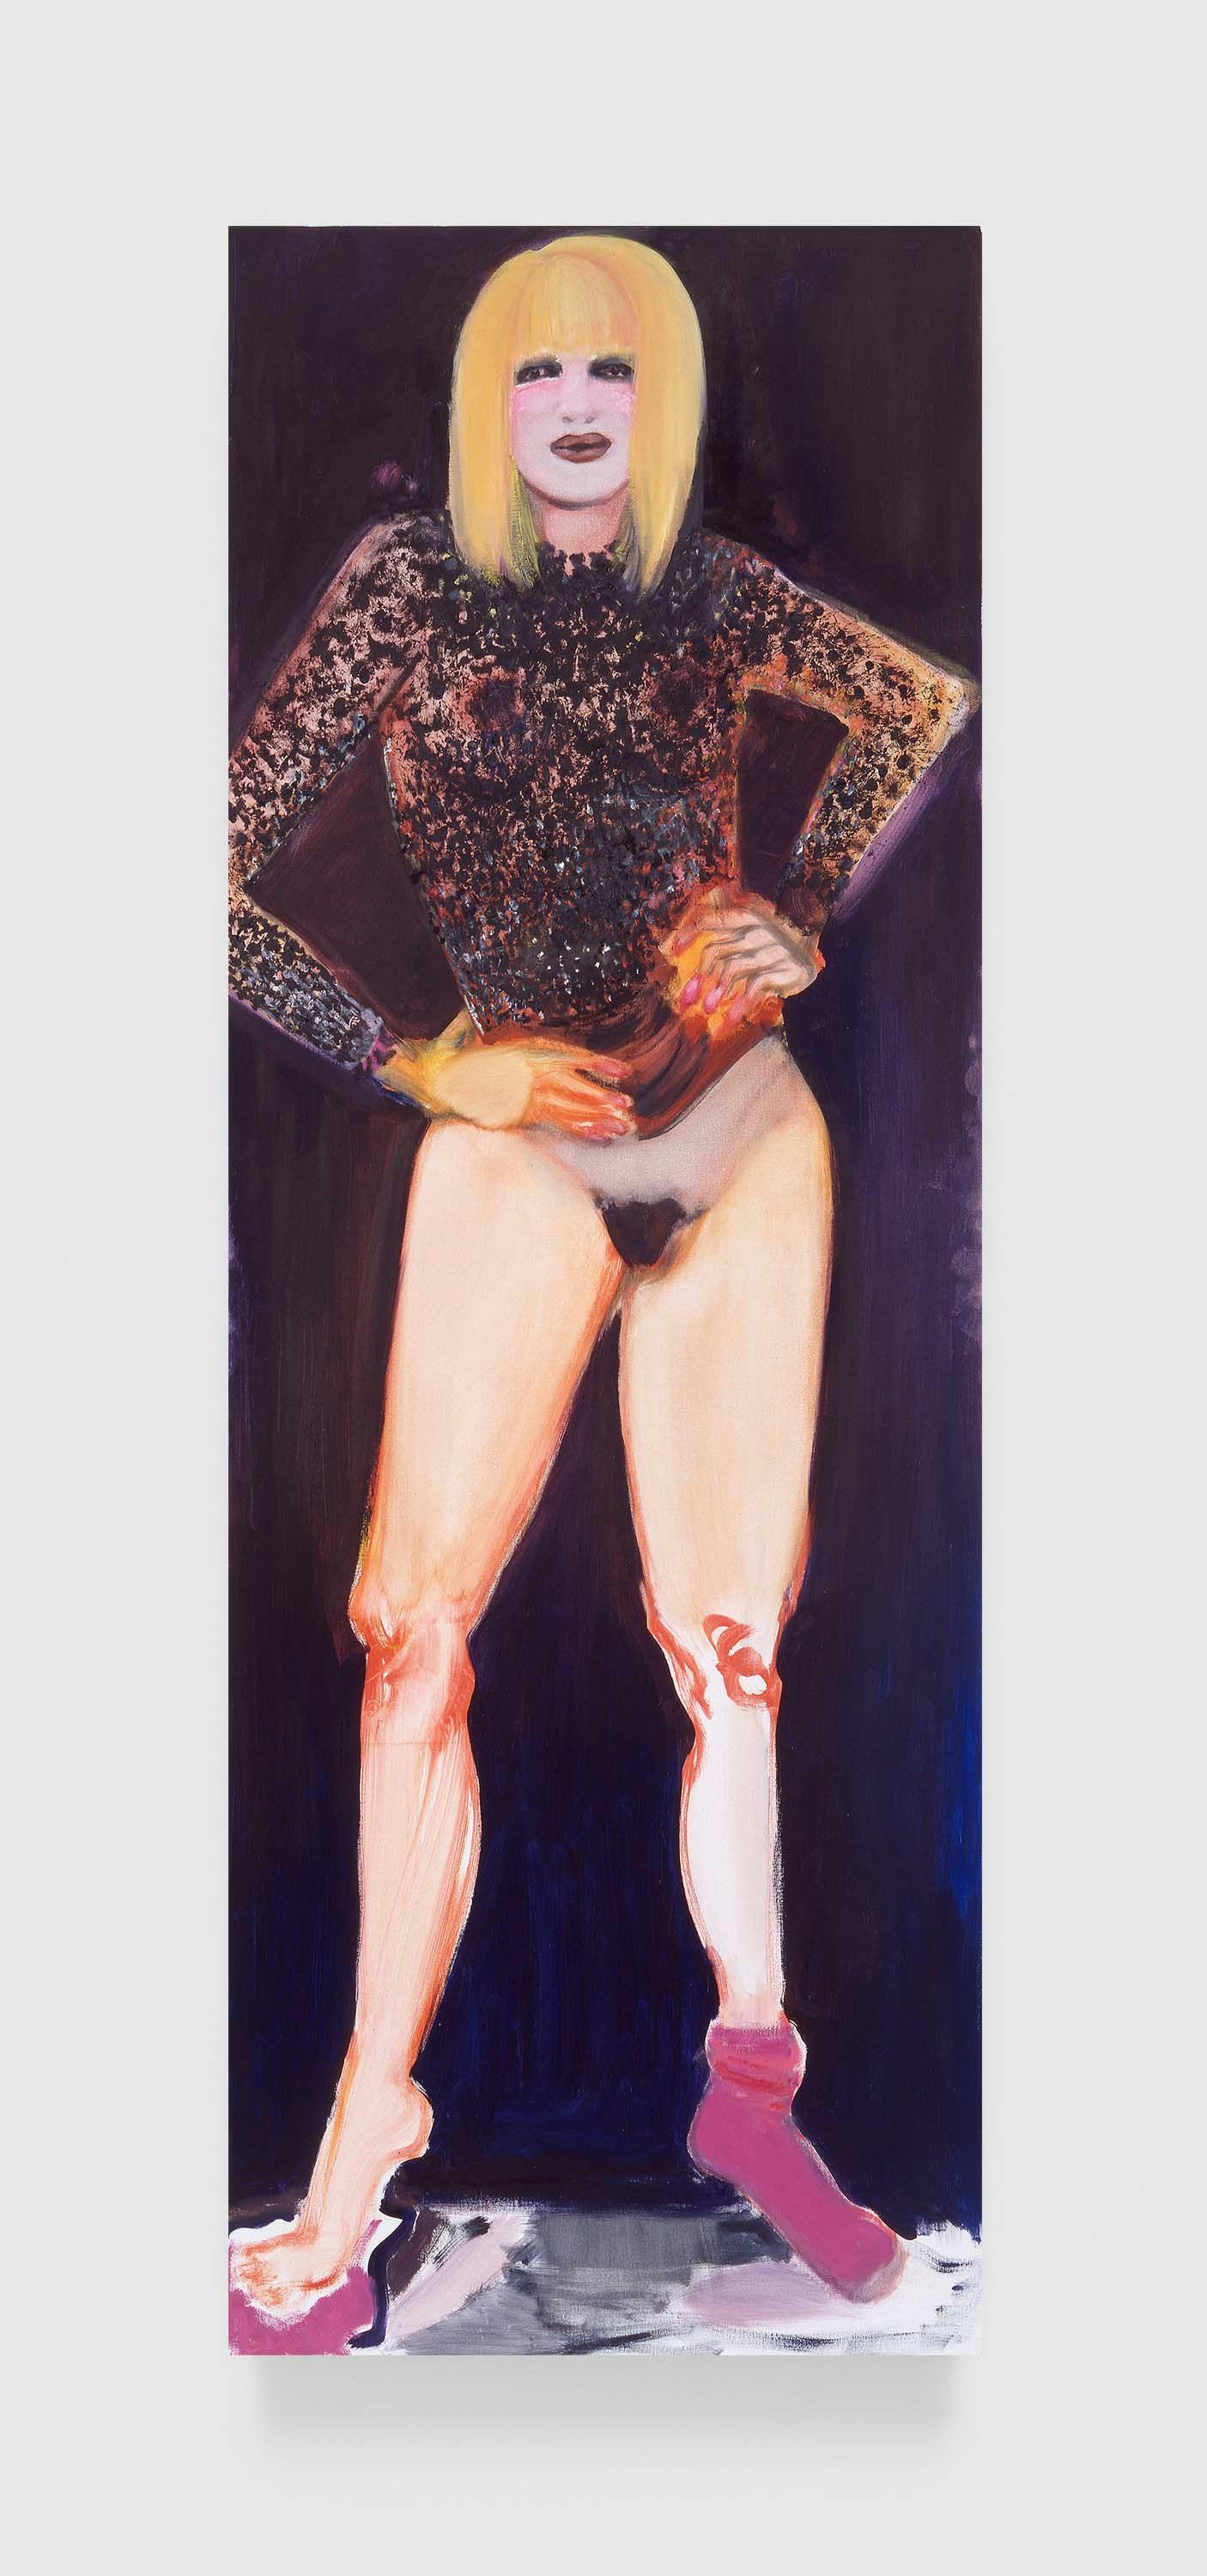 A painting by Marlene Dumas, titled Miss January, dated 1997.